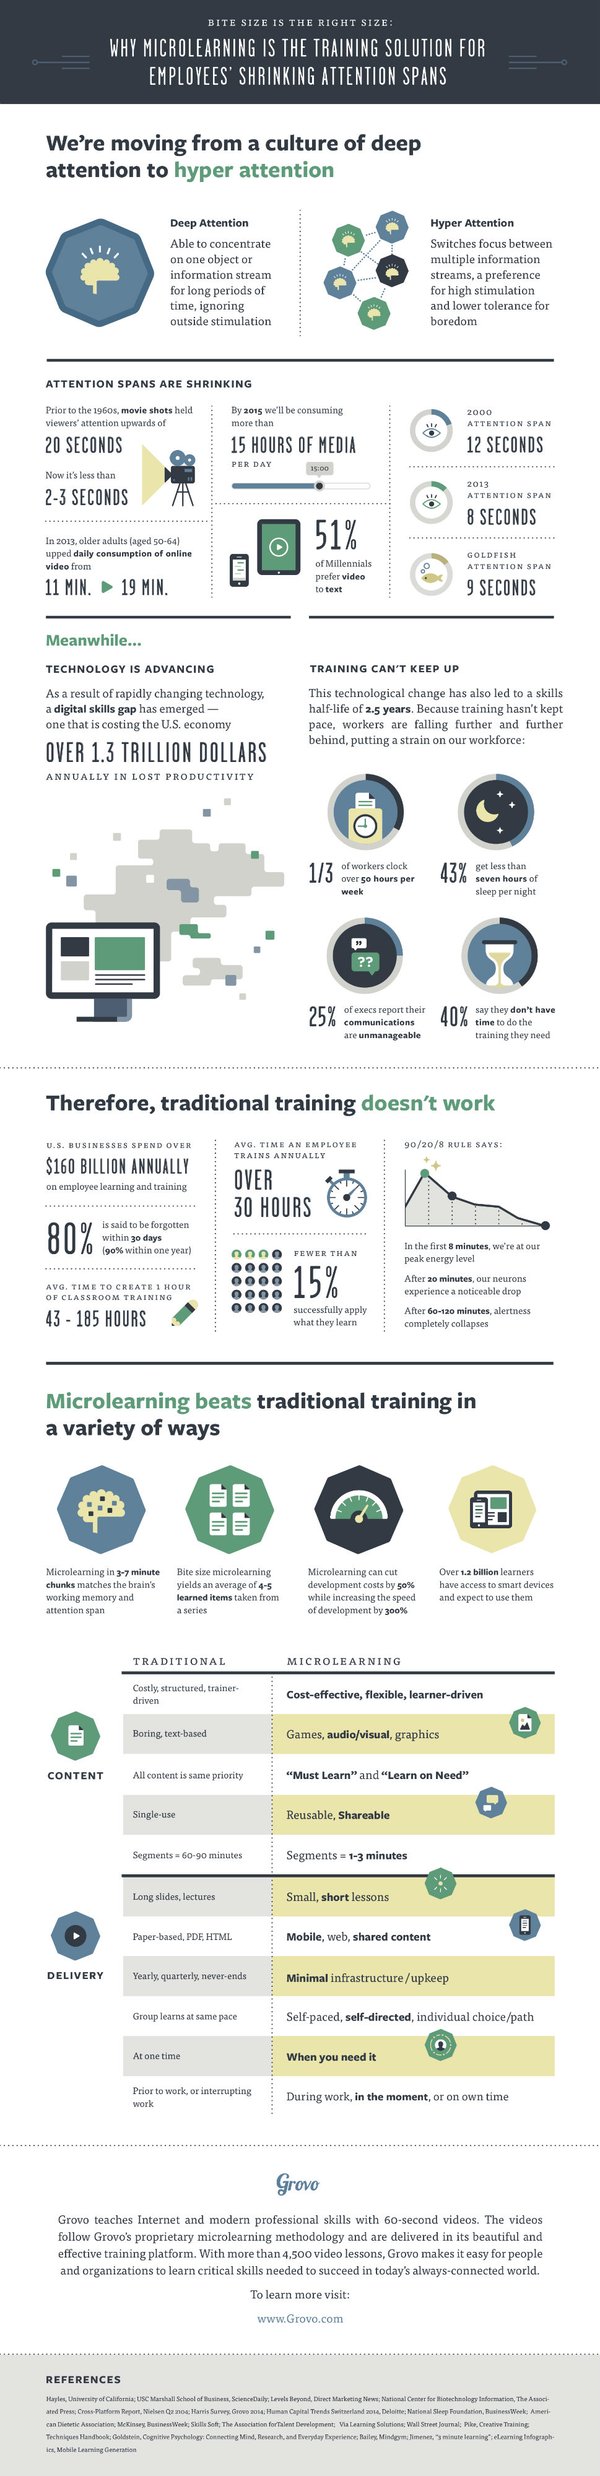 Why-Microlearning-is-the-Training-Solution-infographic-by-Grovo 2